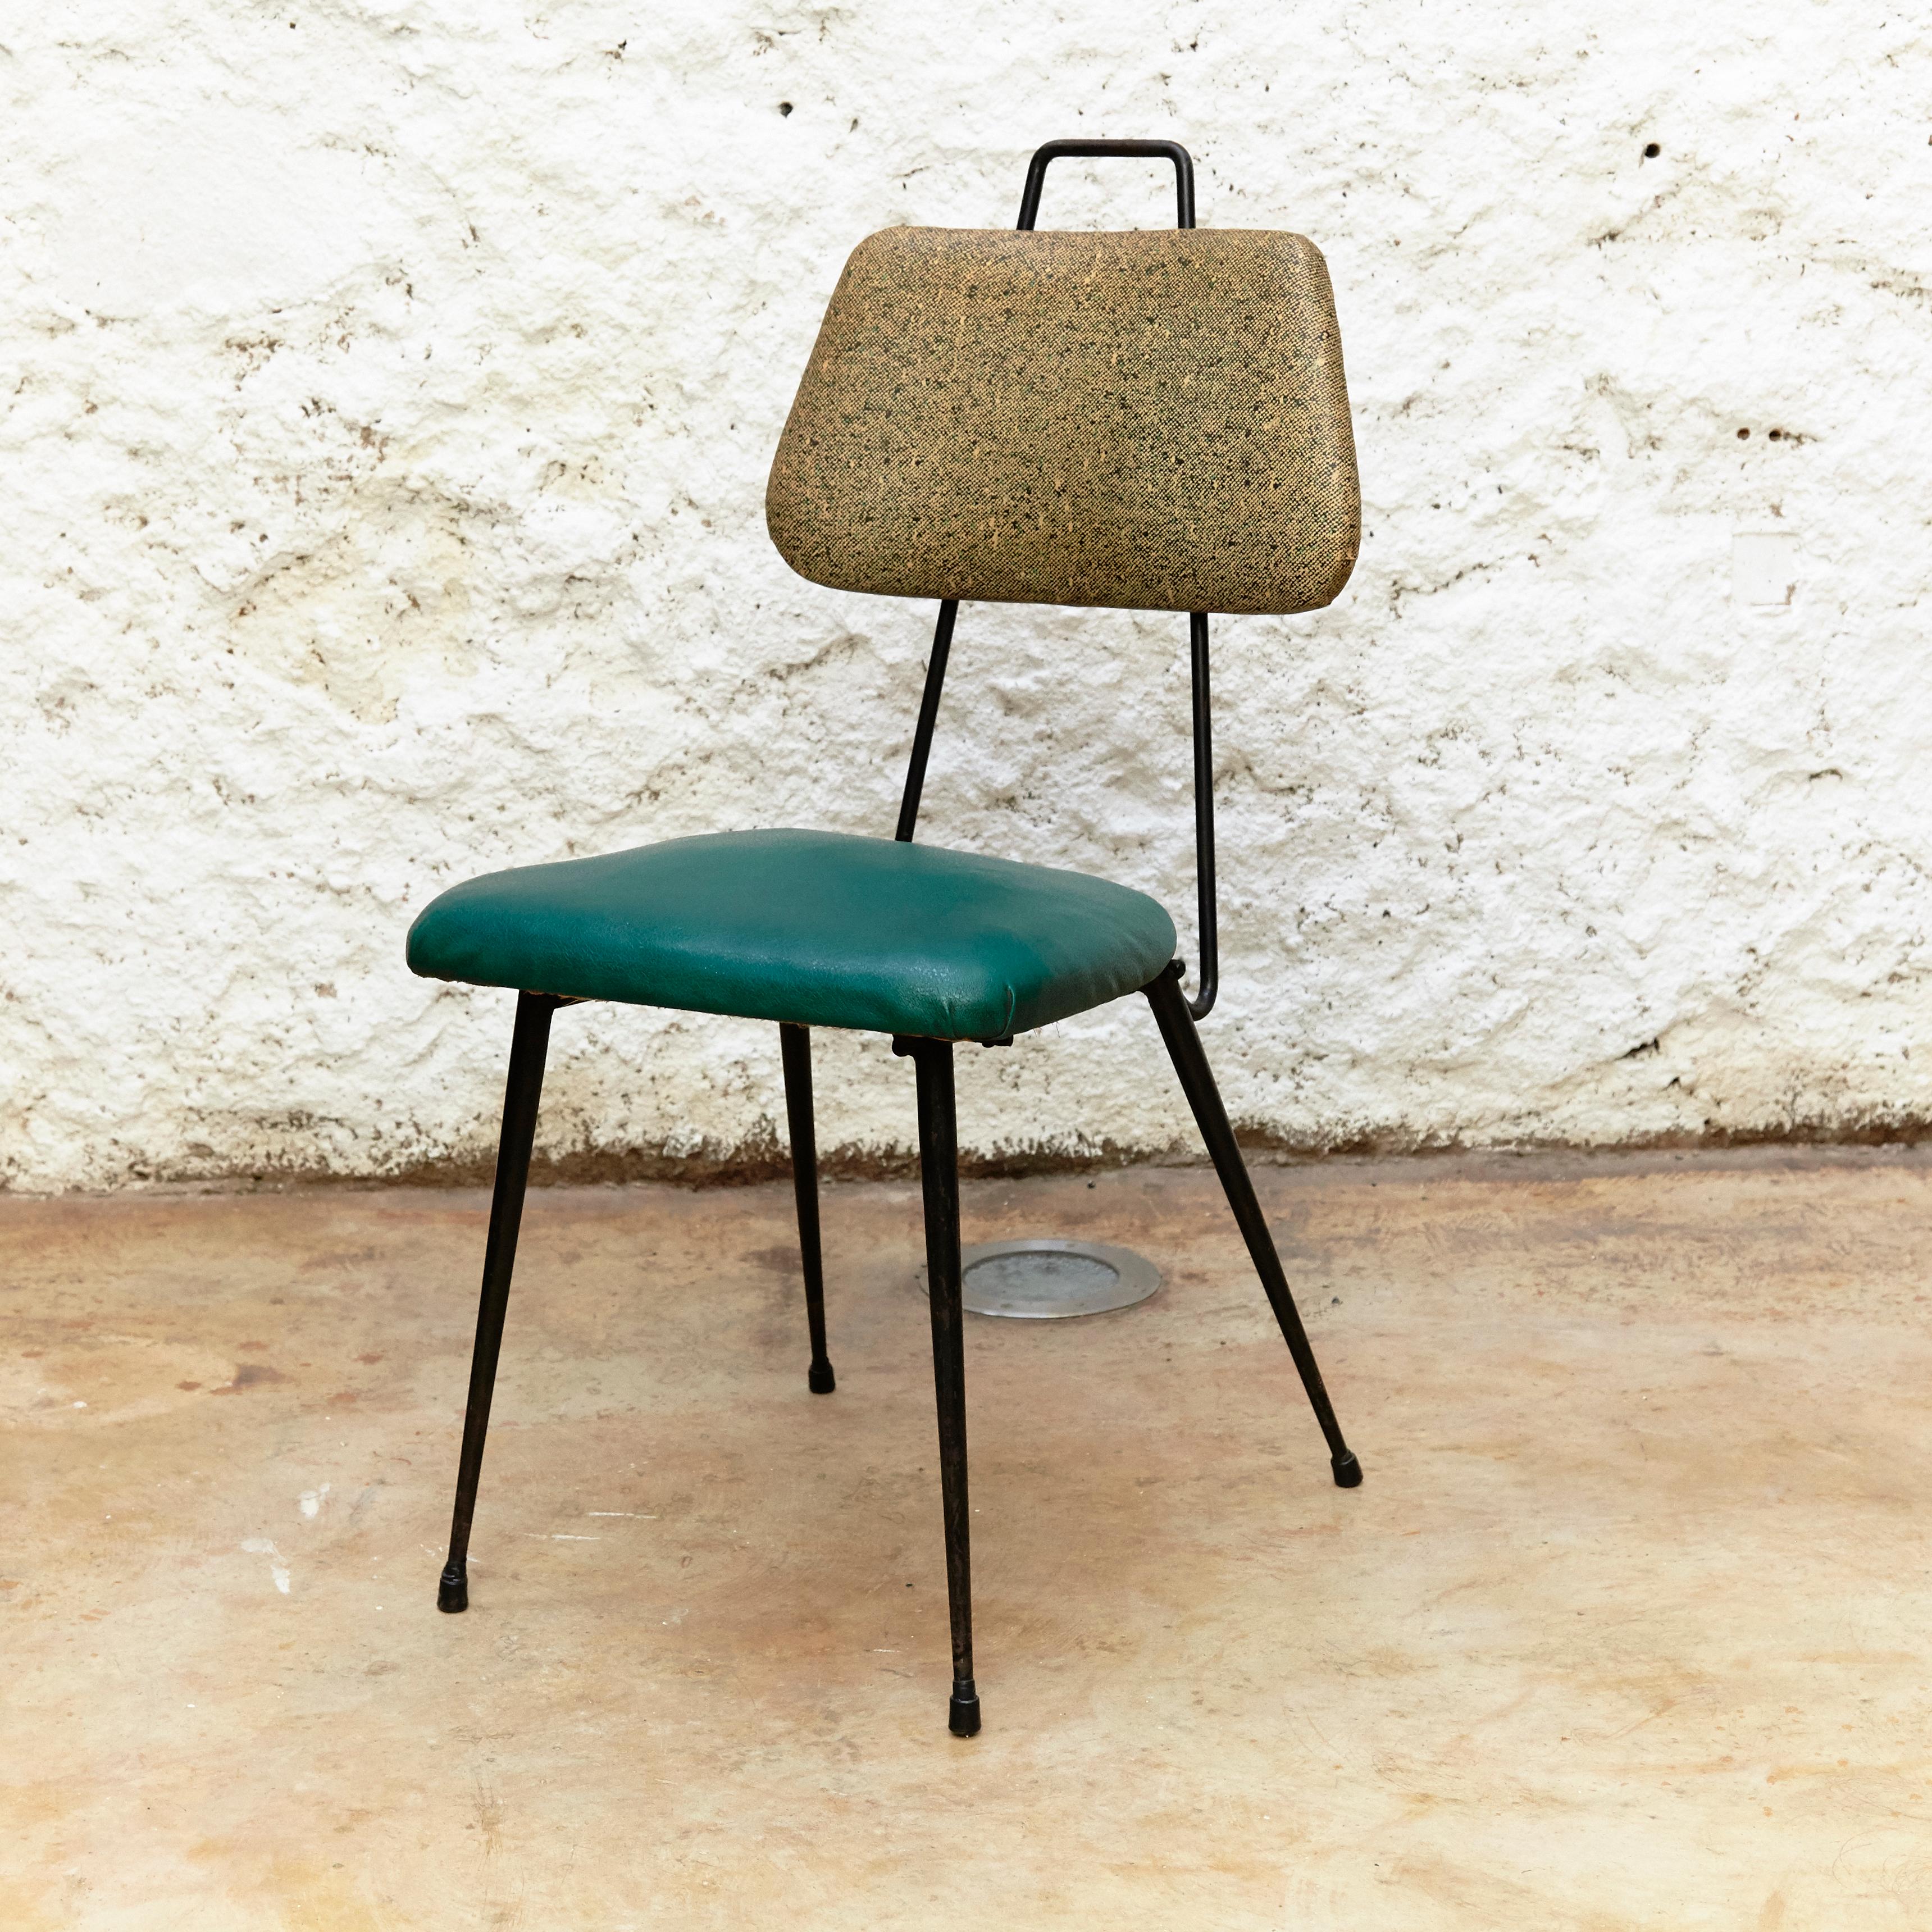 Skie and lacquered metal Mid-Century Modern chair designed by Hermanos Vidal,
Manufactured in Spain, circa 1950.

In original condition, preserving a beautiful patina.